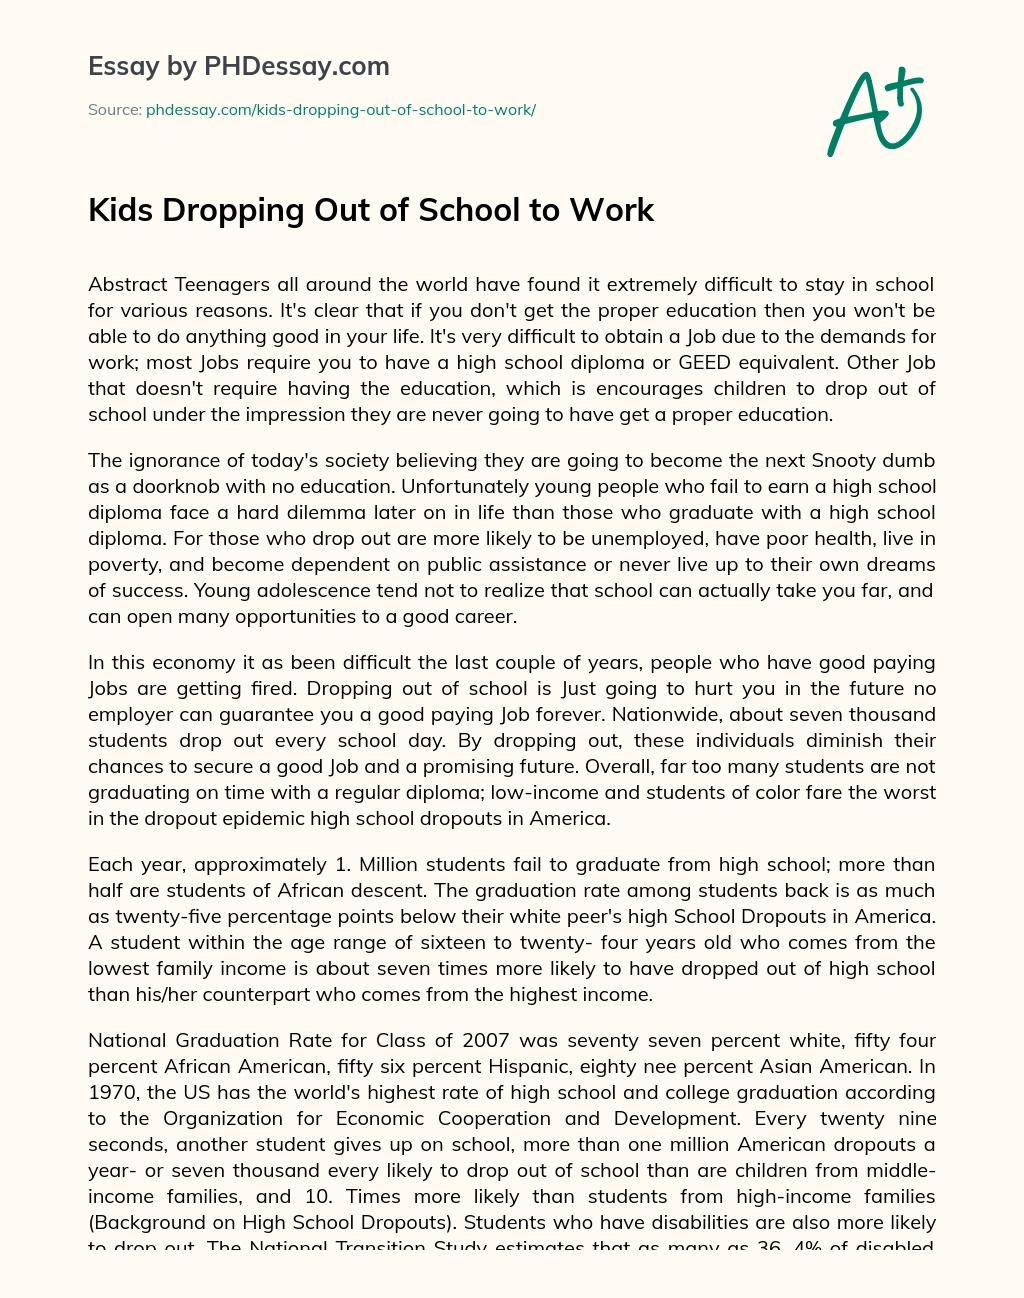 Kids Dropping Out of School to Work essay